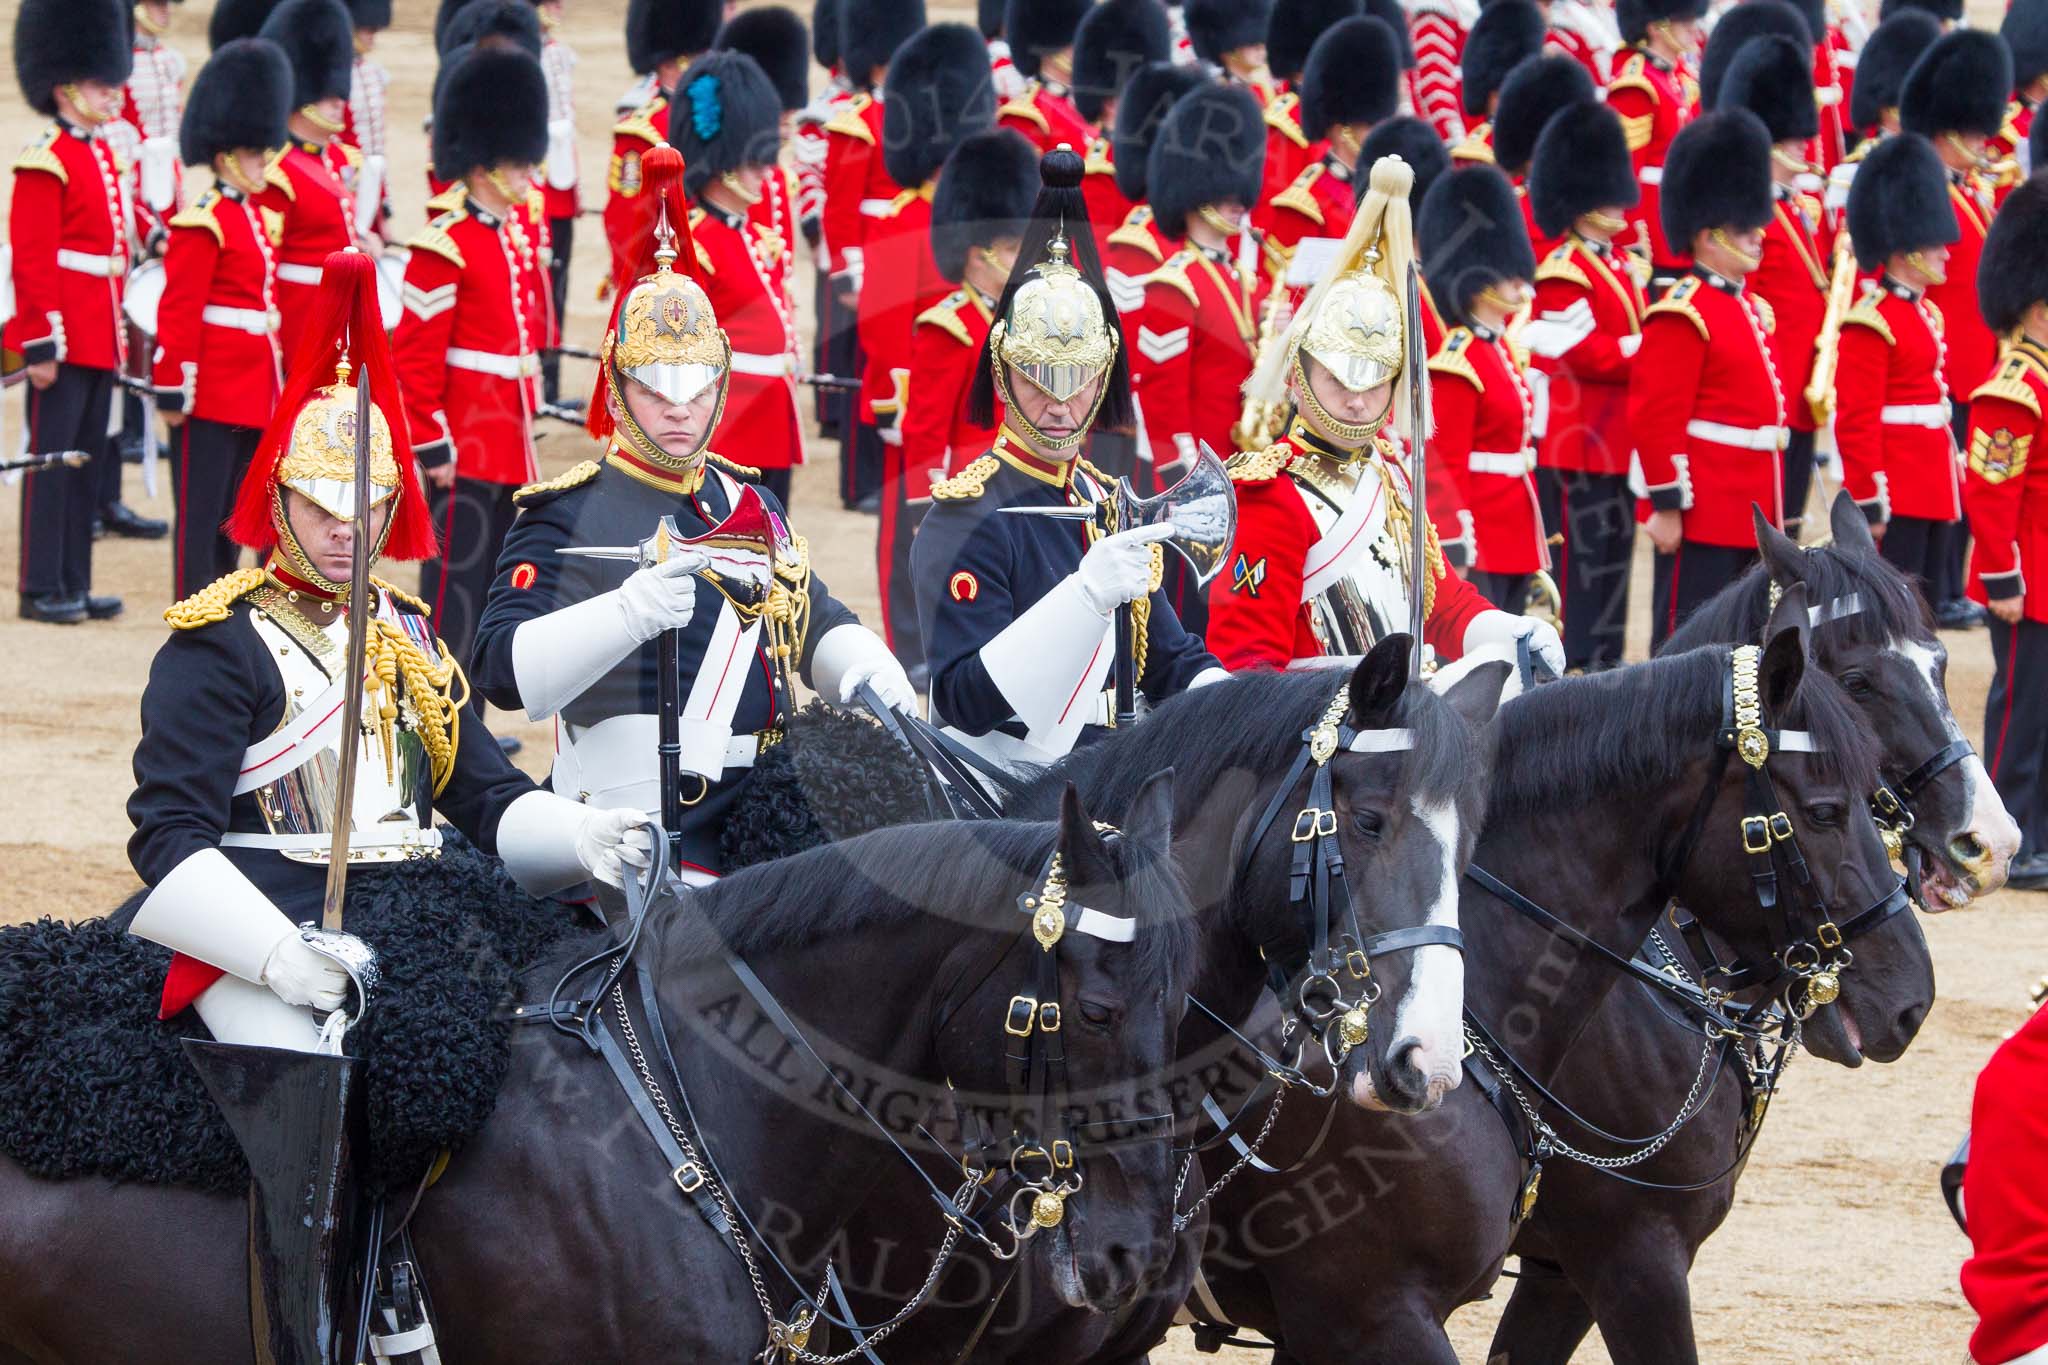 Trooping the Colour 2014.
Horse Guards Parade, Westminster,
London SW1A,

United Kingdom,
on 14 June 2014 at 11:58, image #784